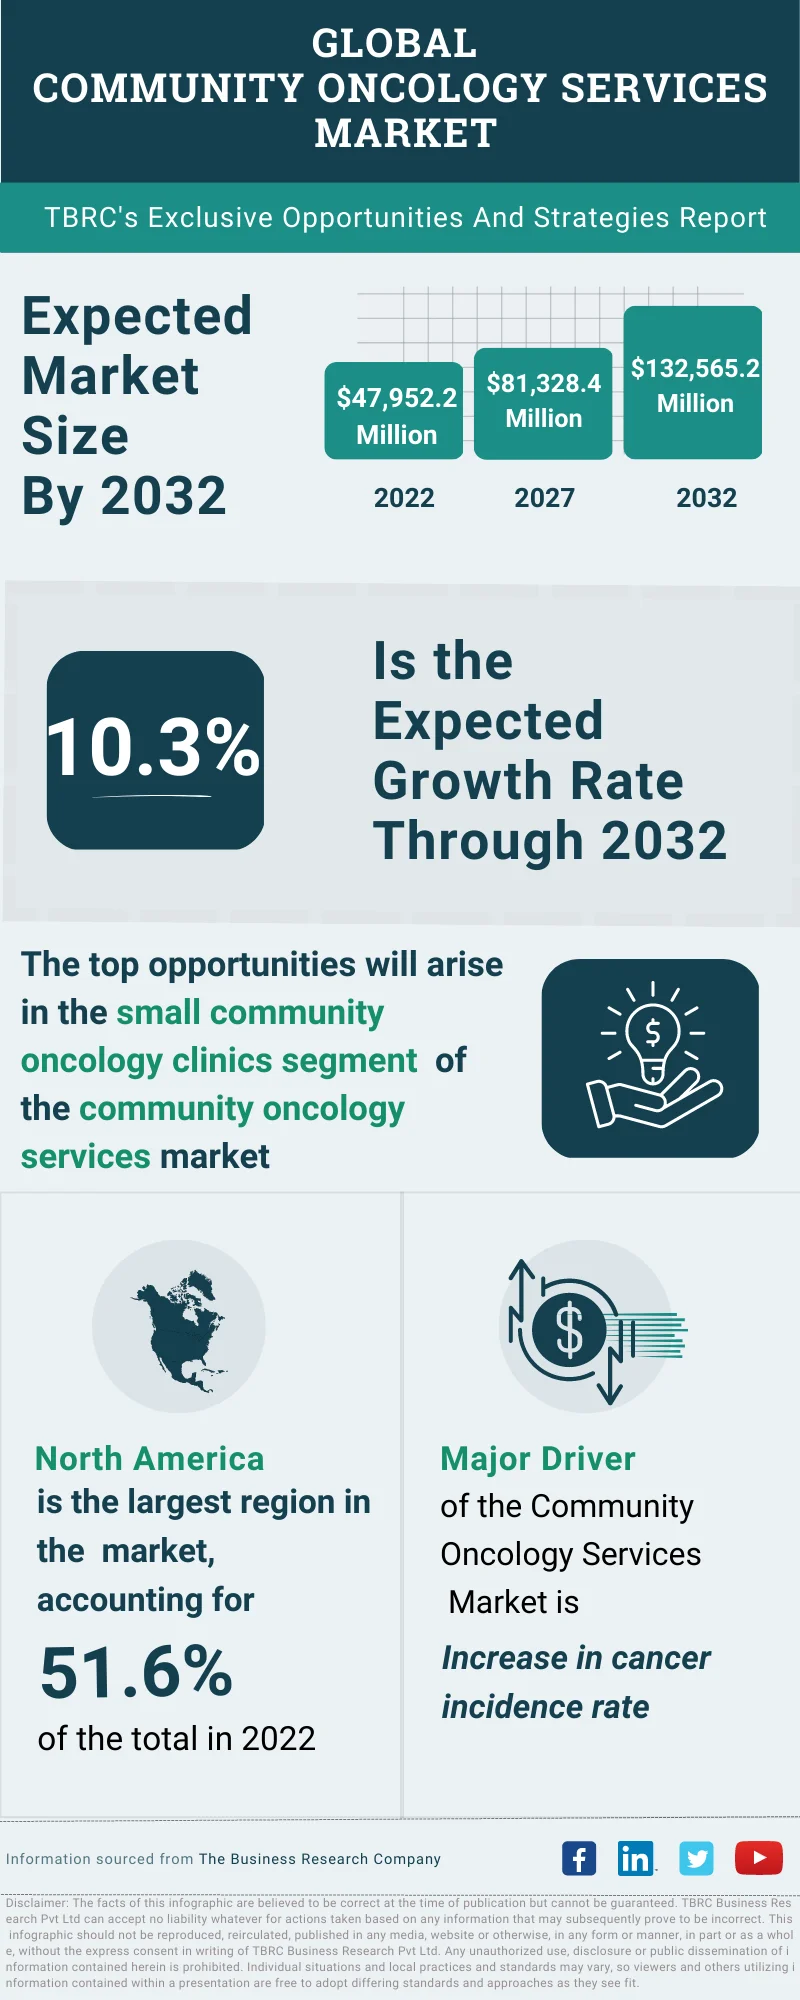 Community Oncology Services Global Market Opportunities And Strategies To 2032